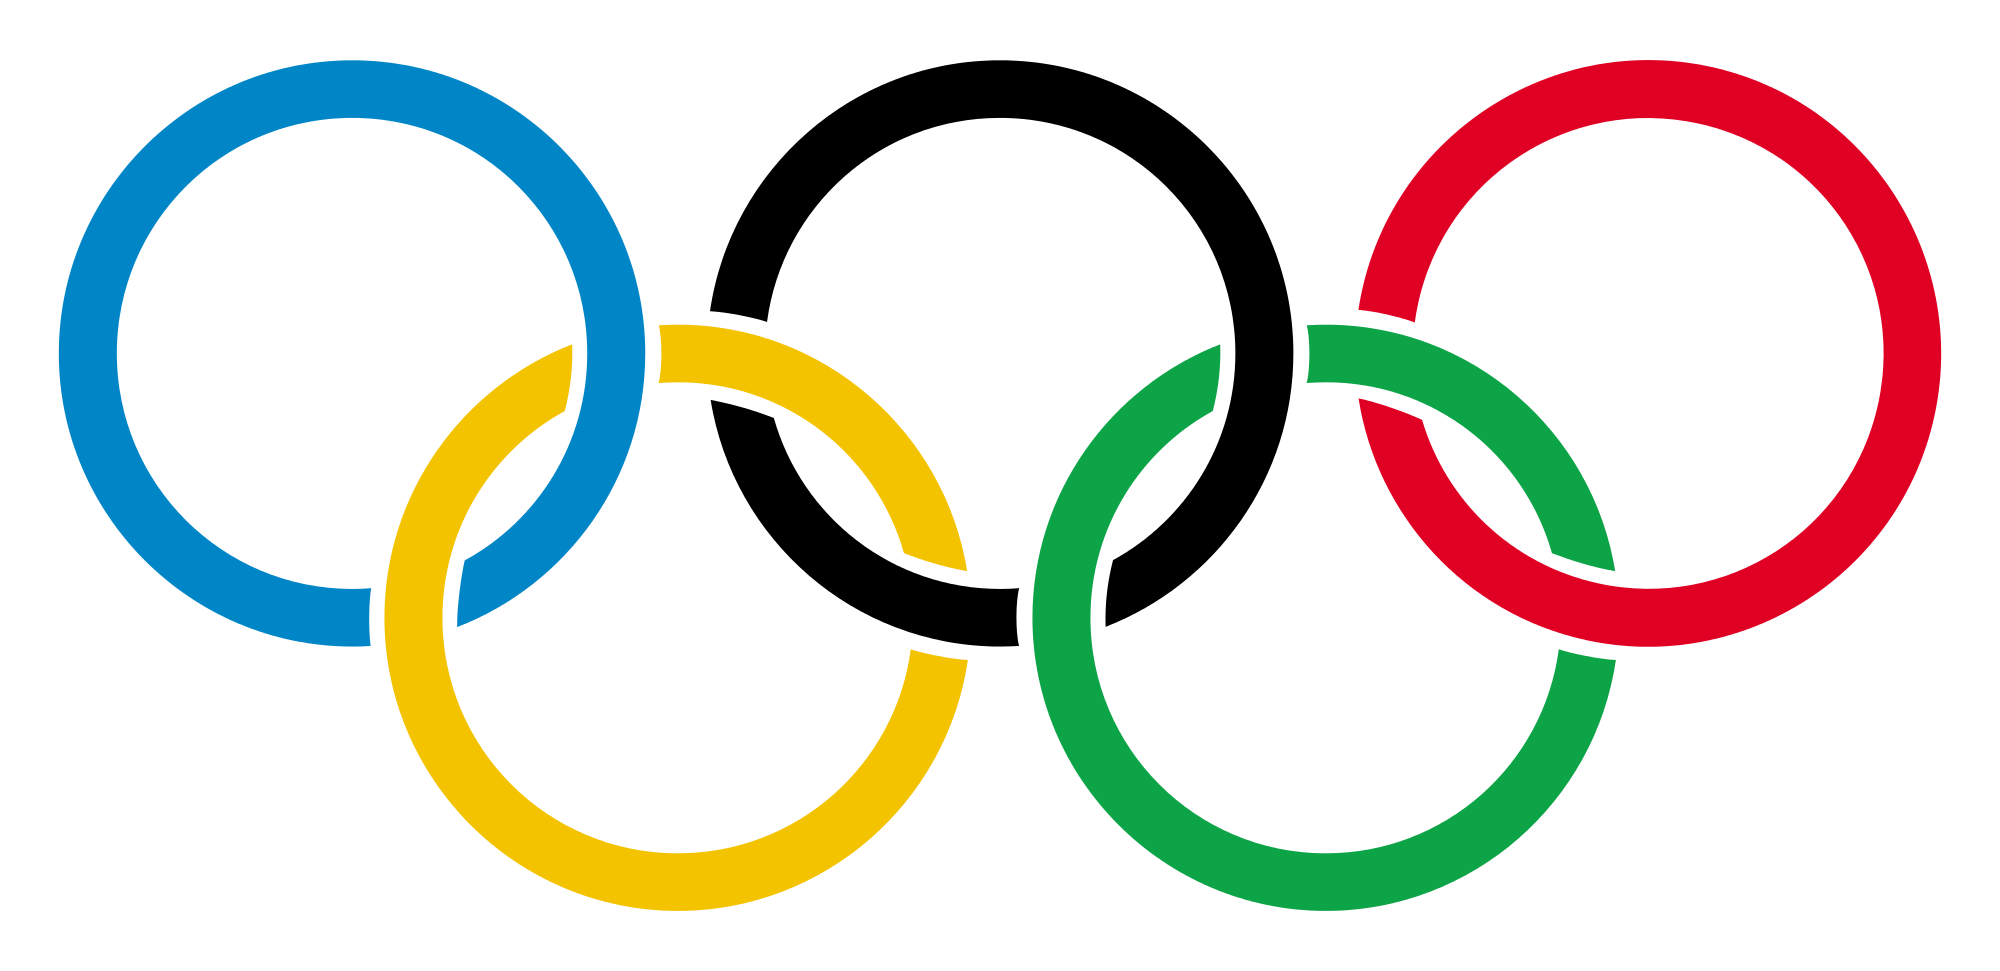 Olympic Rings Png Hd - Olympic Rings Transparent Background 3, Transparent background PNG HD thumbnail